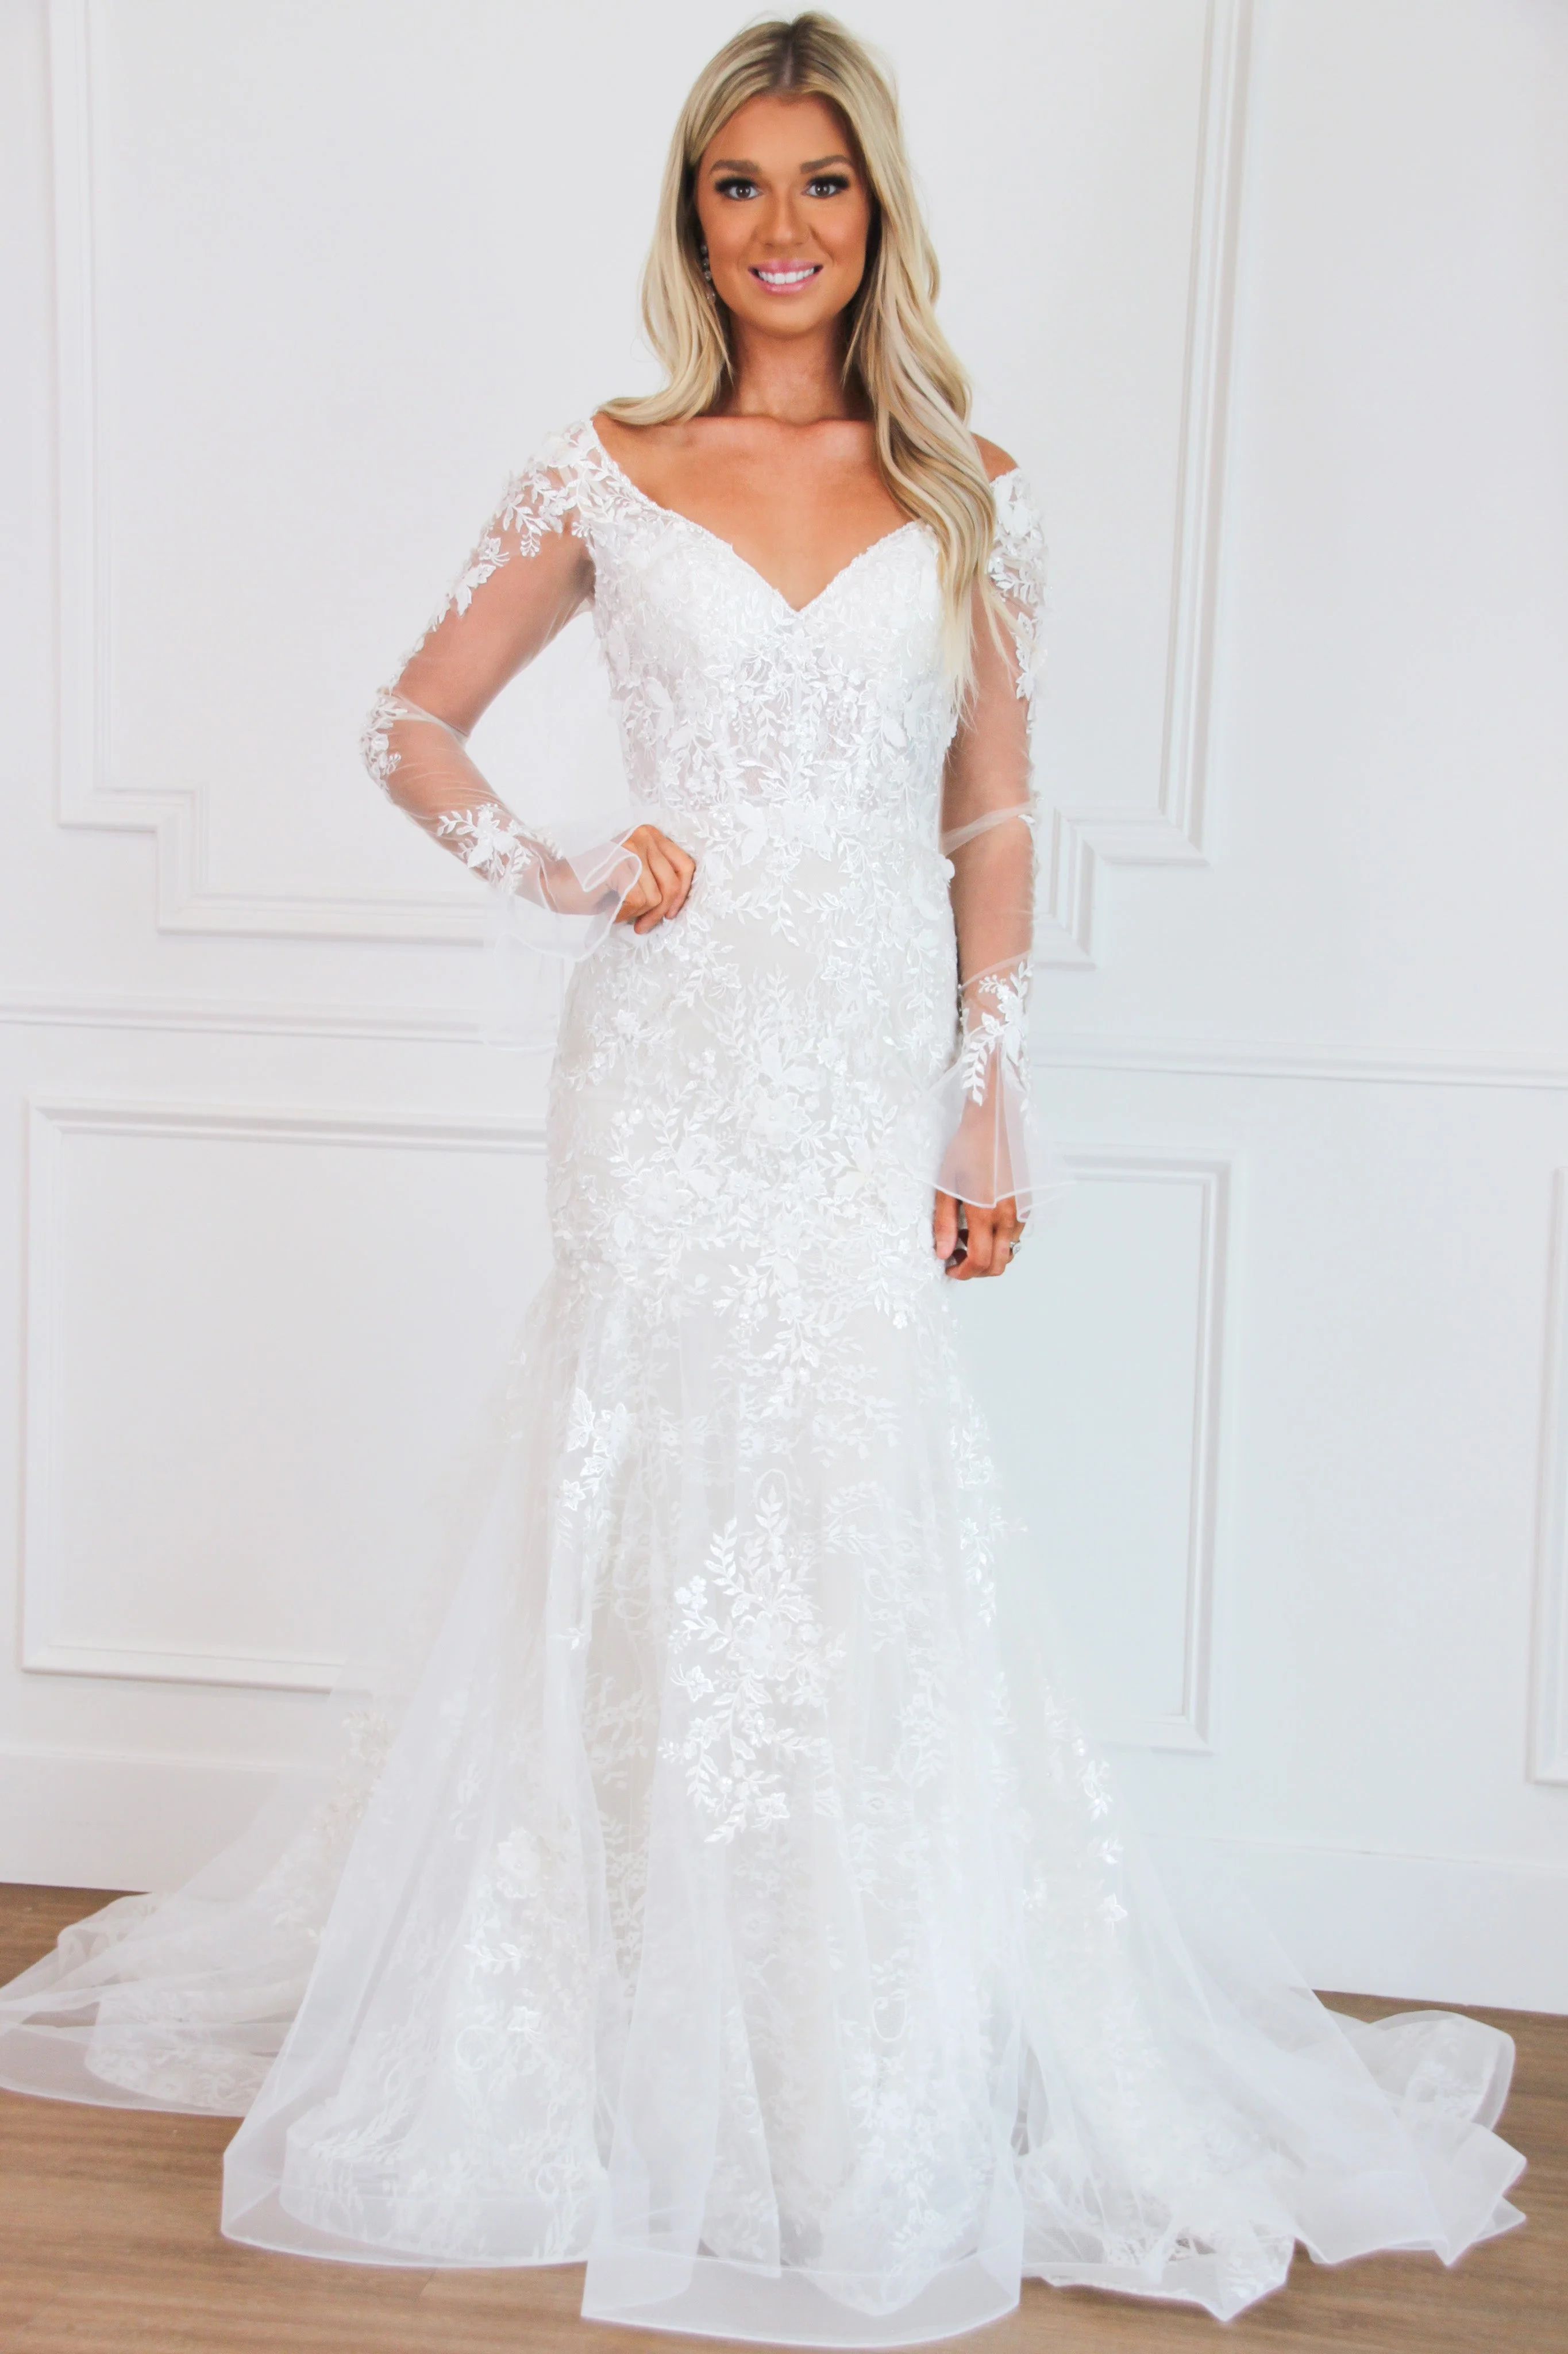 Giselle Floral Applique Long Sleeve Wedding Dress: Off White/Nude | Bella and Bloom Boutique